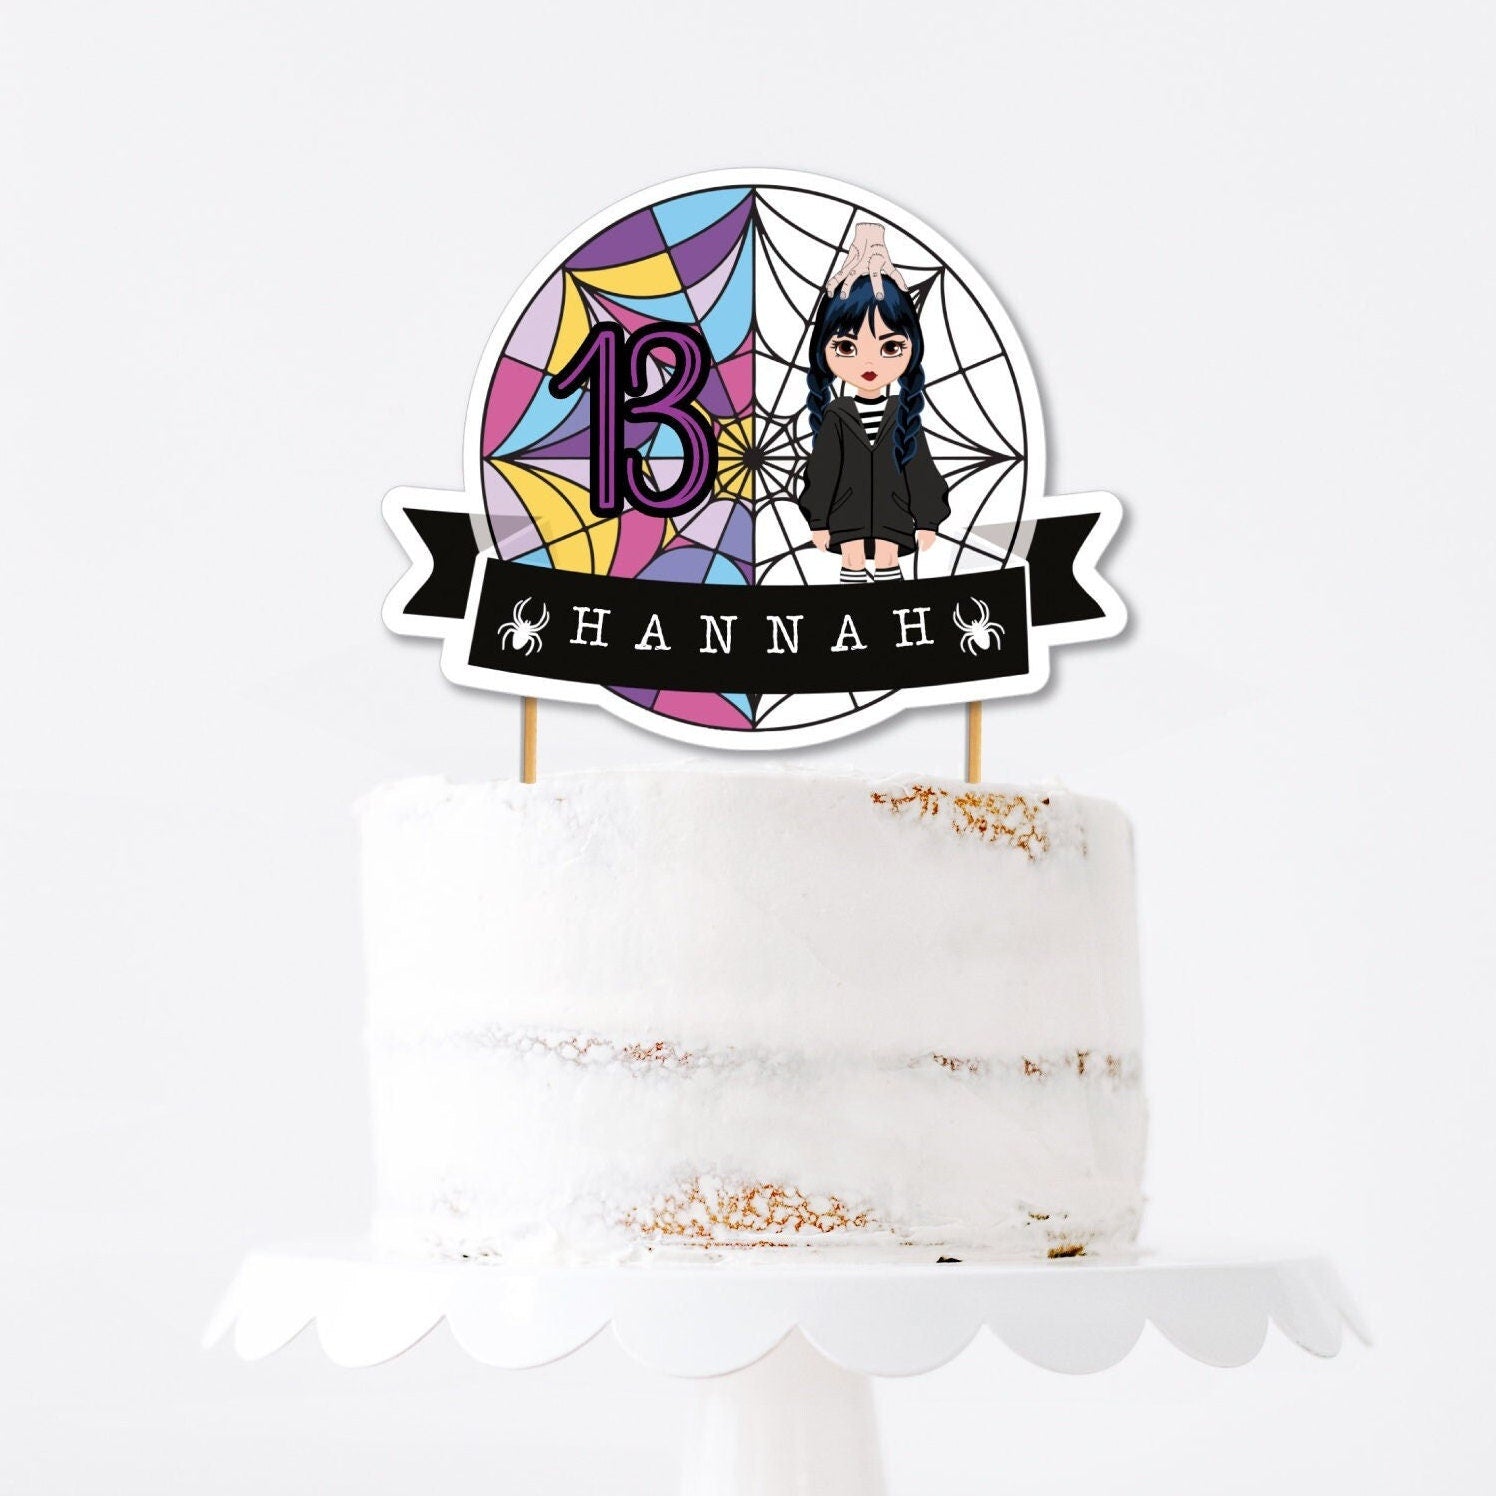 Free Wednesday Addams Cupcake Toppers Printables!